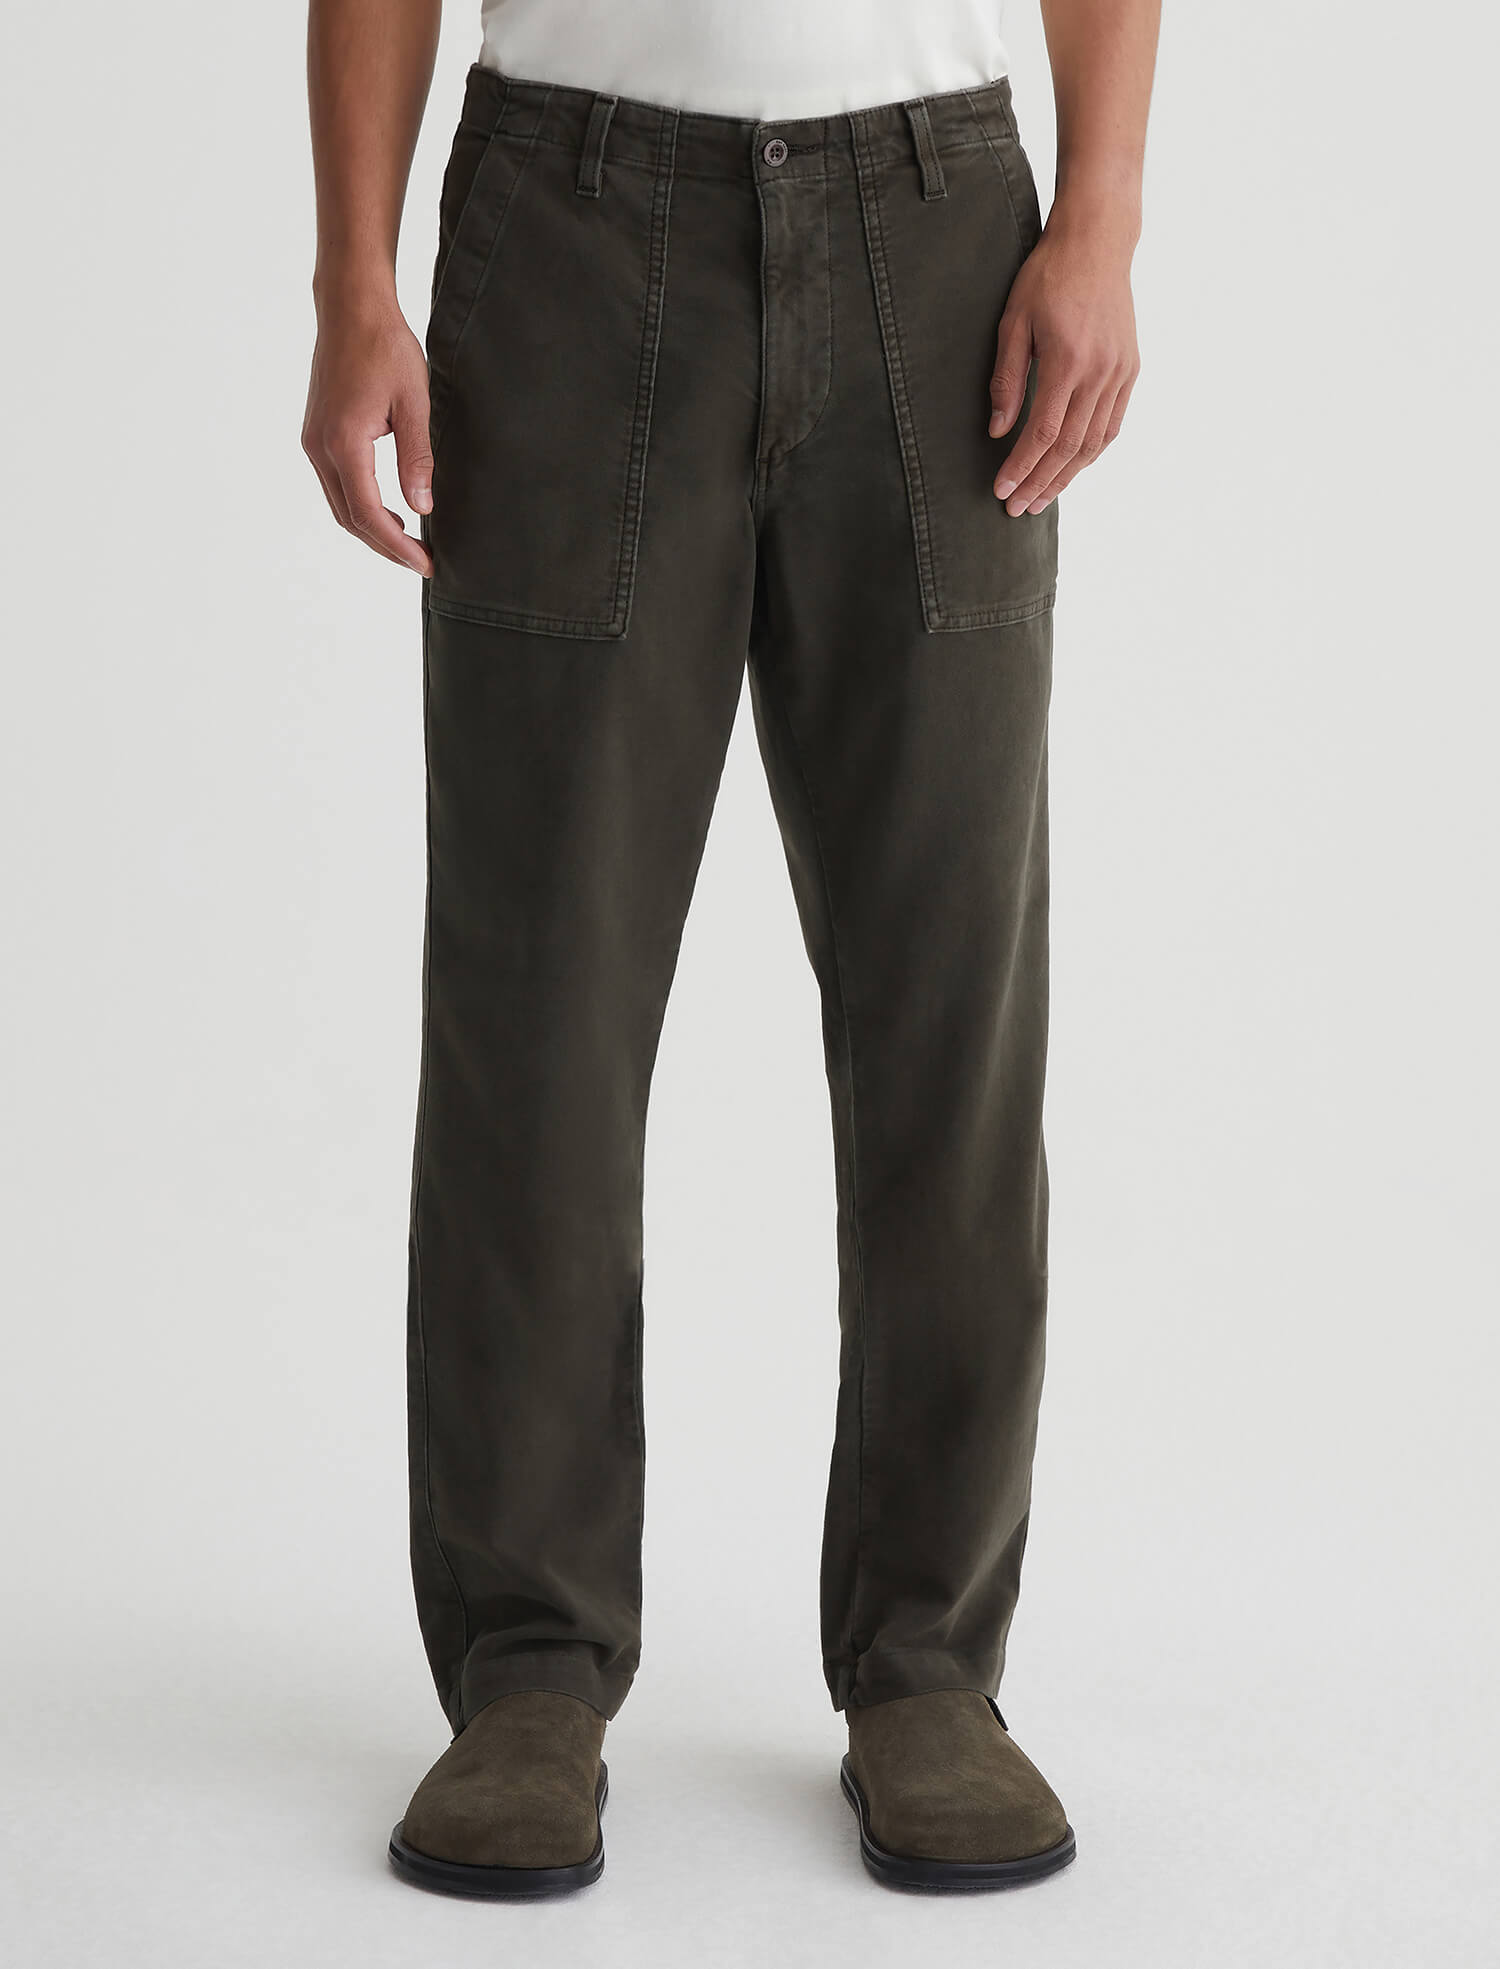 Men's Pants and Trousers at AG Jeans Official Store